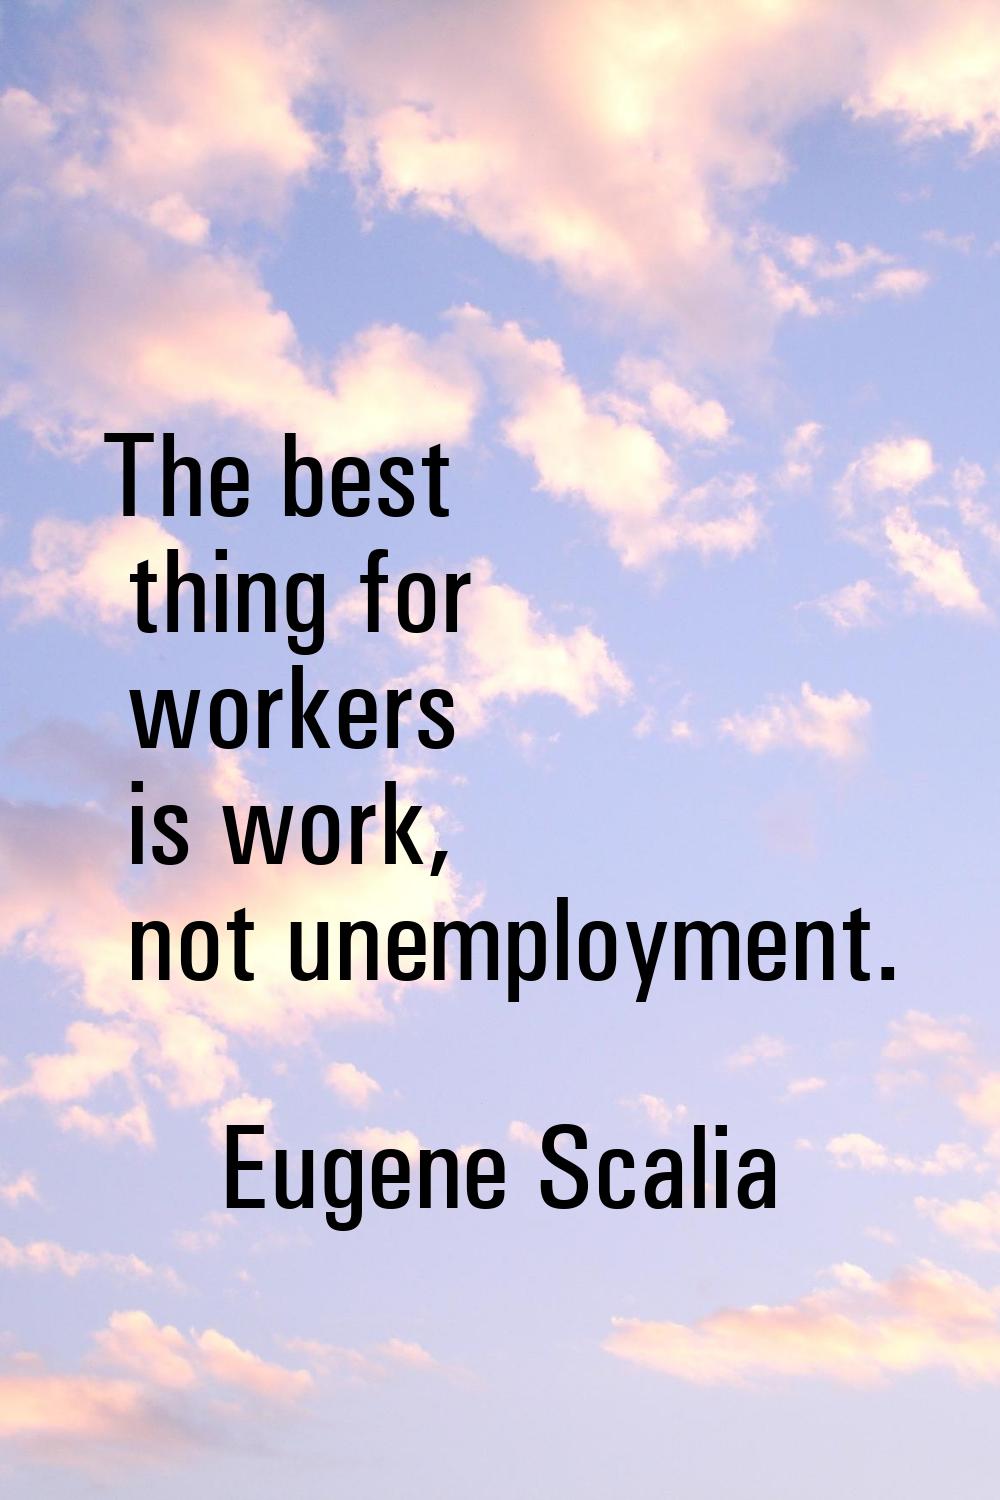 The best thing for workers is work, not unemployment.